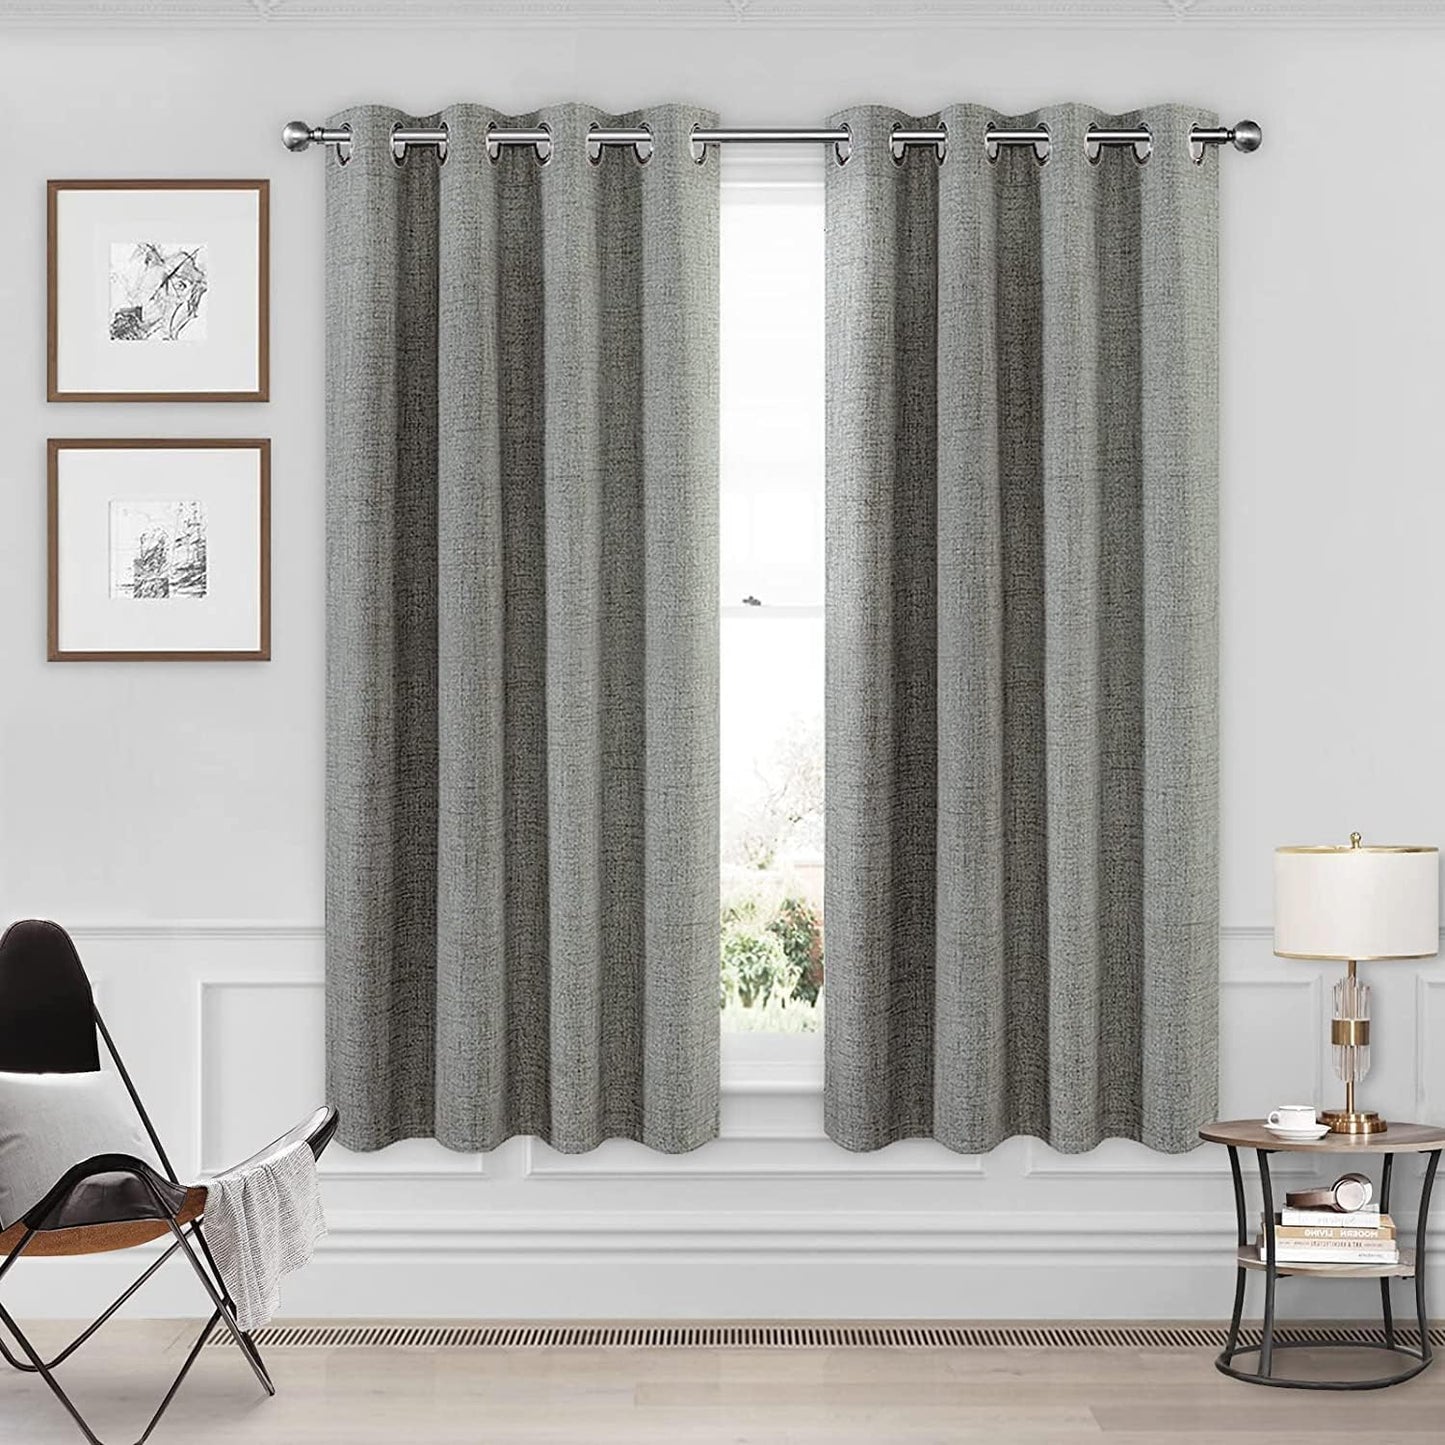 CUCRAF Full Blackout Window Curtains 84 Inches Long,Faux Linen Look Thermal Insulated Grommet Drapes Panels for Bedroom Living Room,Set of 2(52 X 84 Inches, Light Khaki)  CUCRAF Light Grey 52 X 72 Inches 